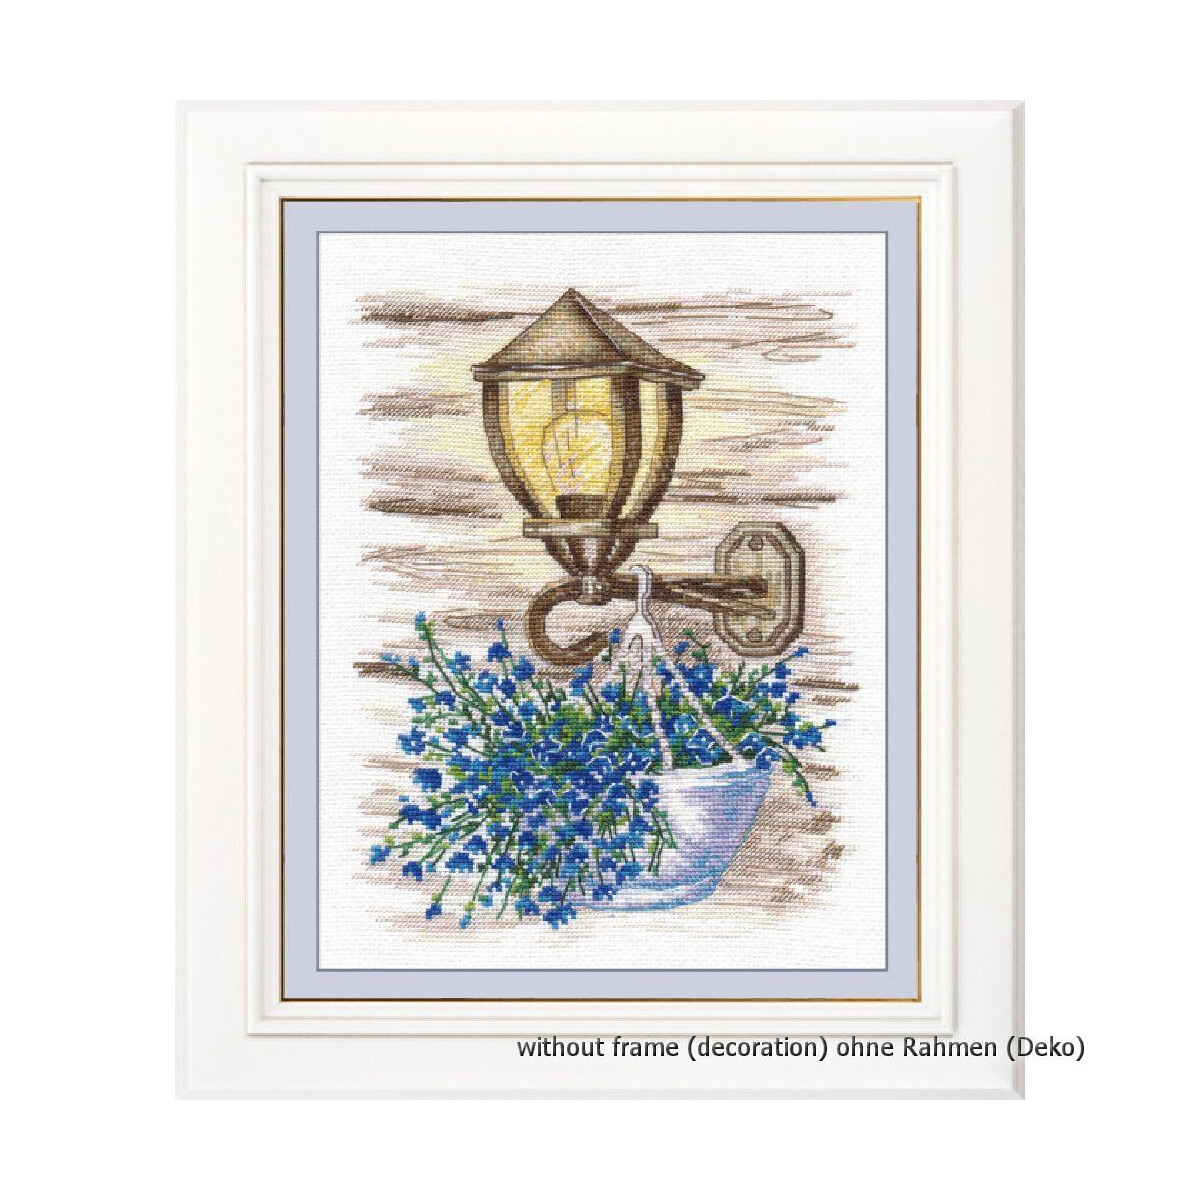 Oven counted cross stitch kit "Lantern with...